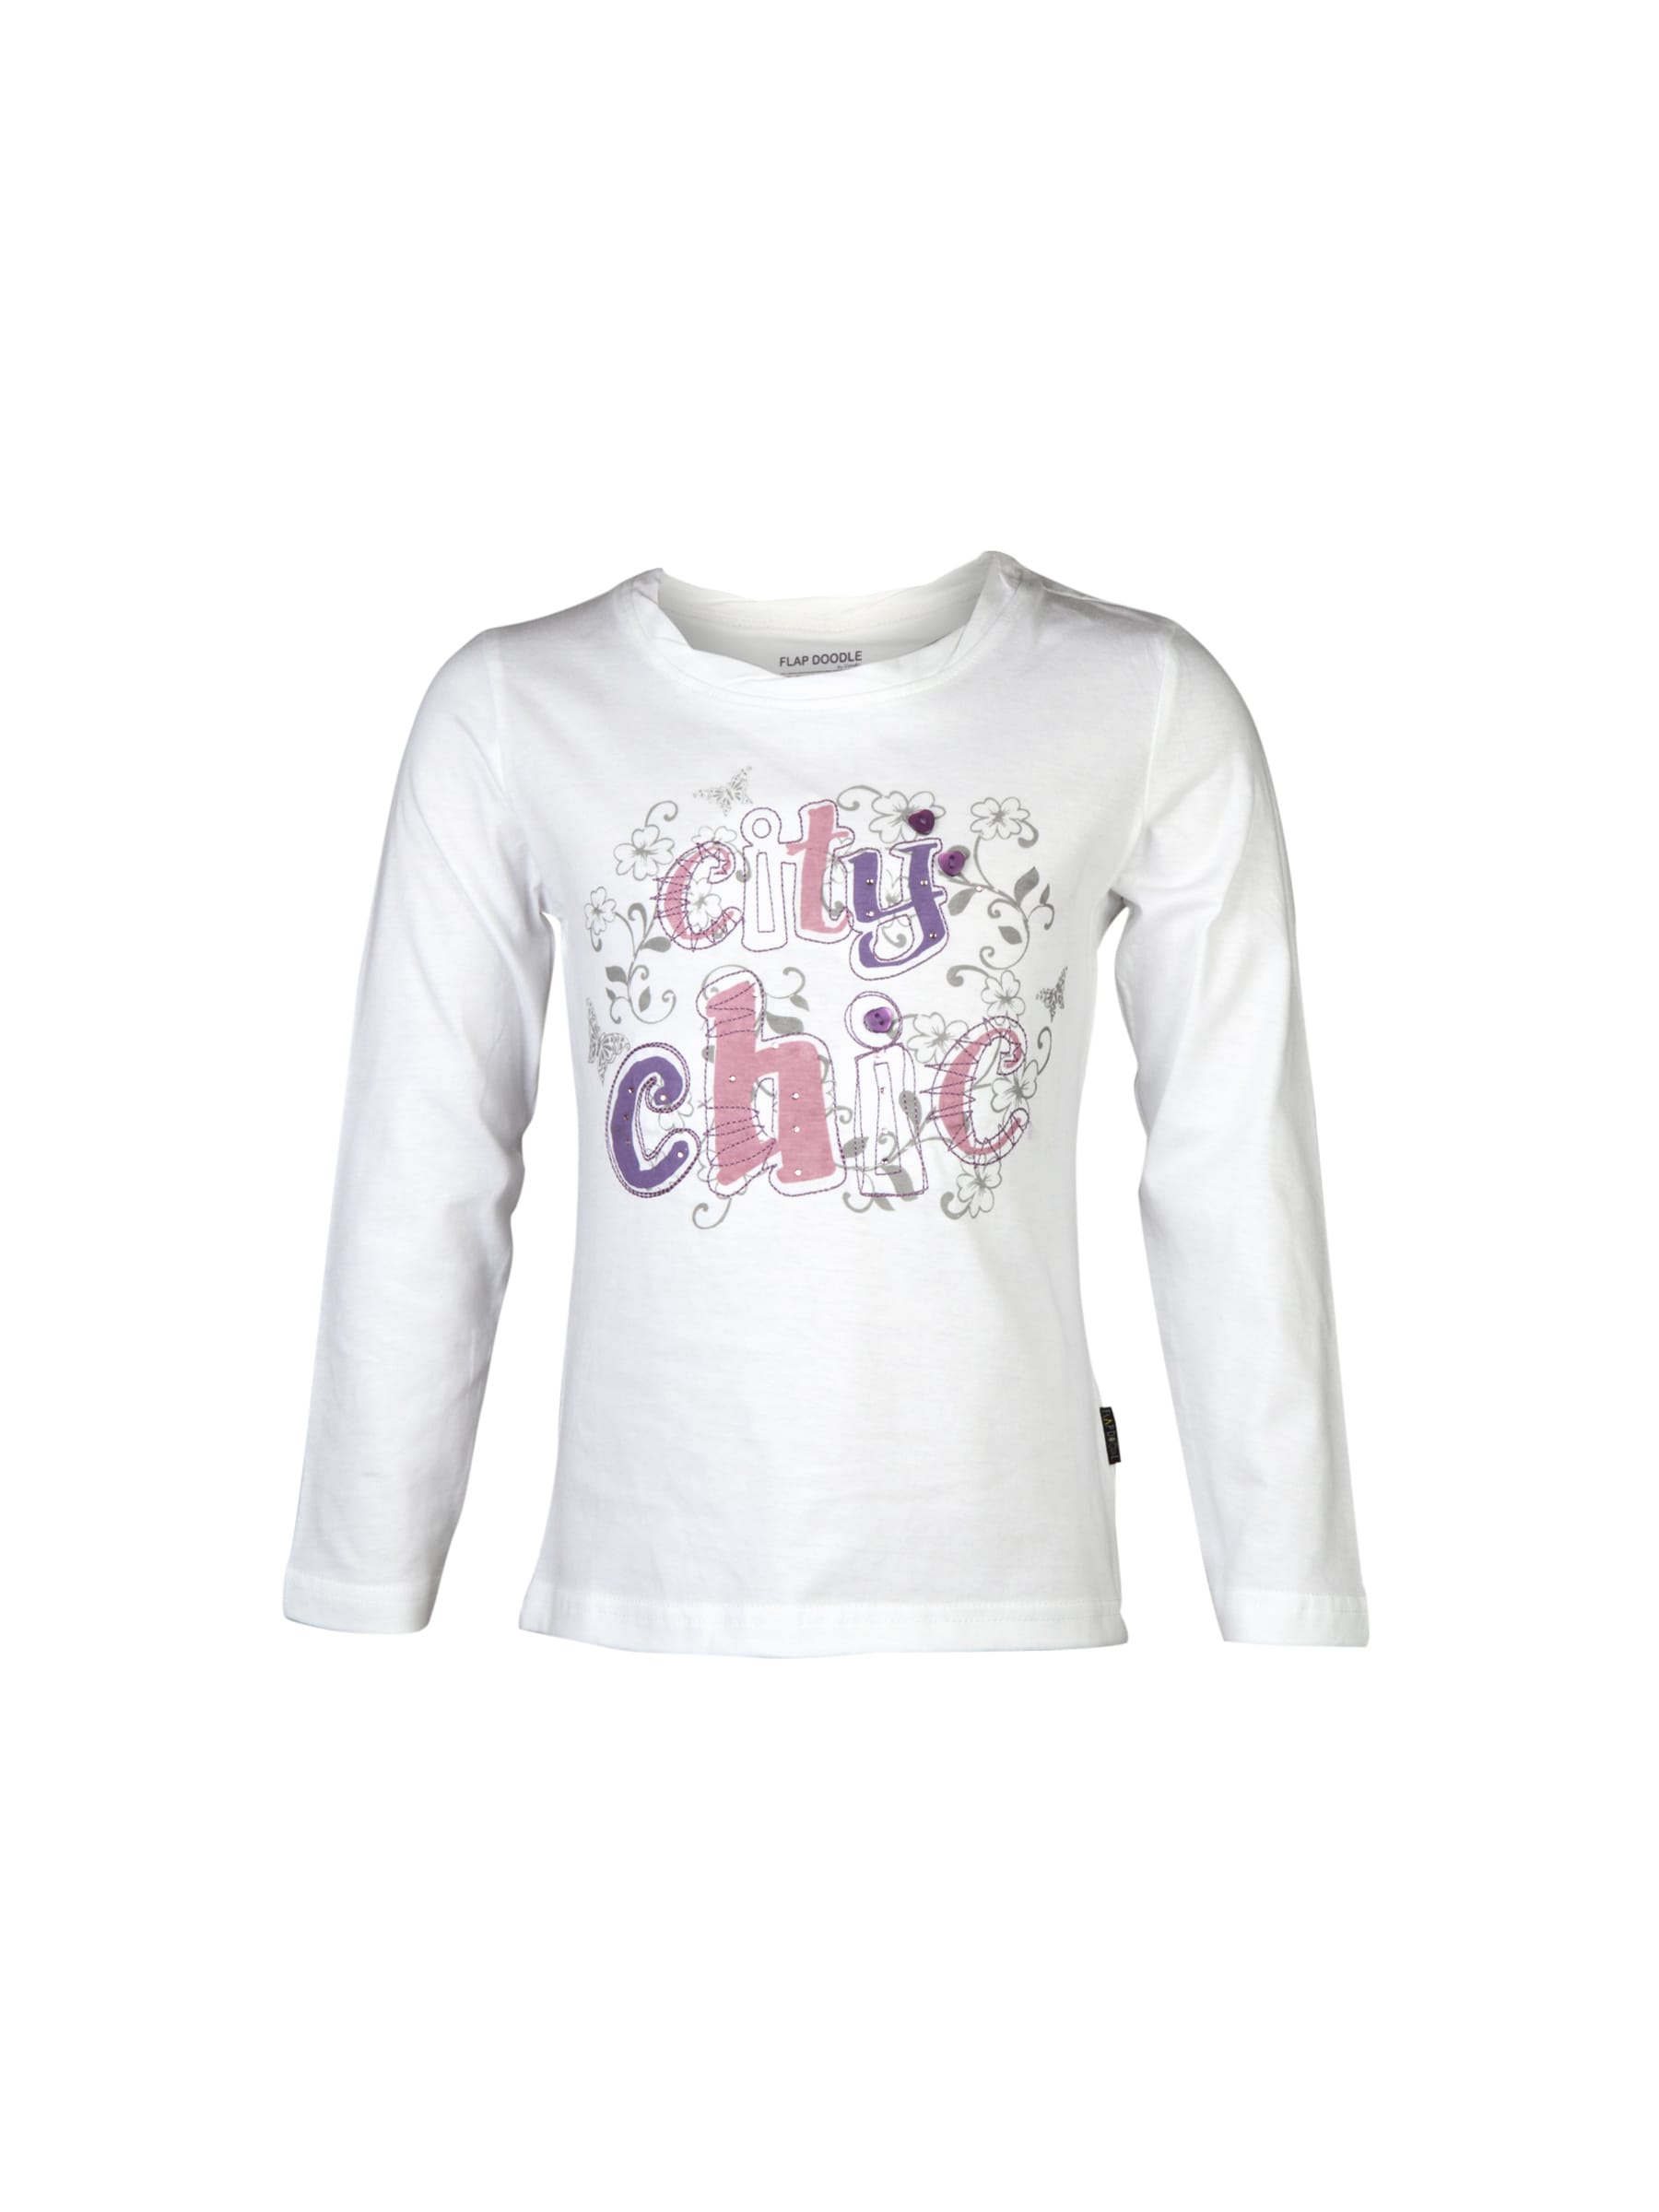 Doodle Kids Girls City Chic White Top